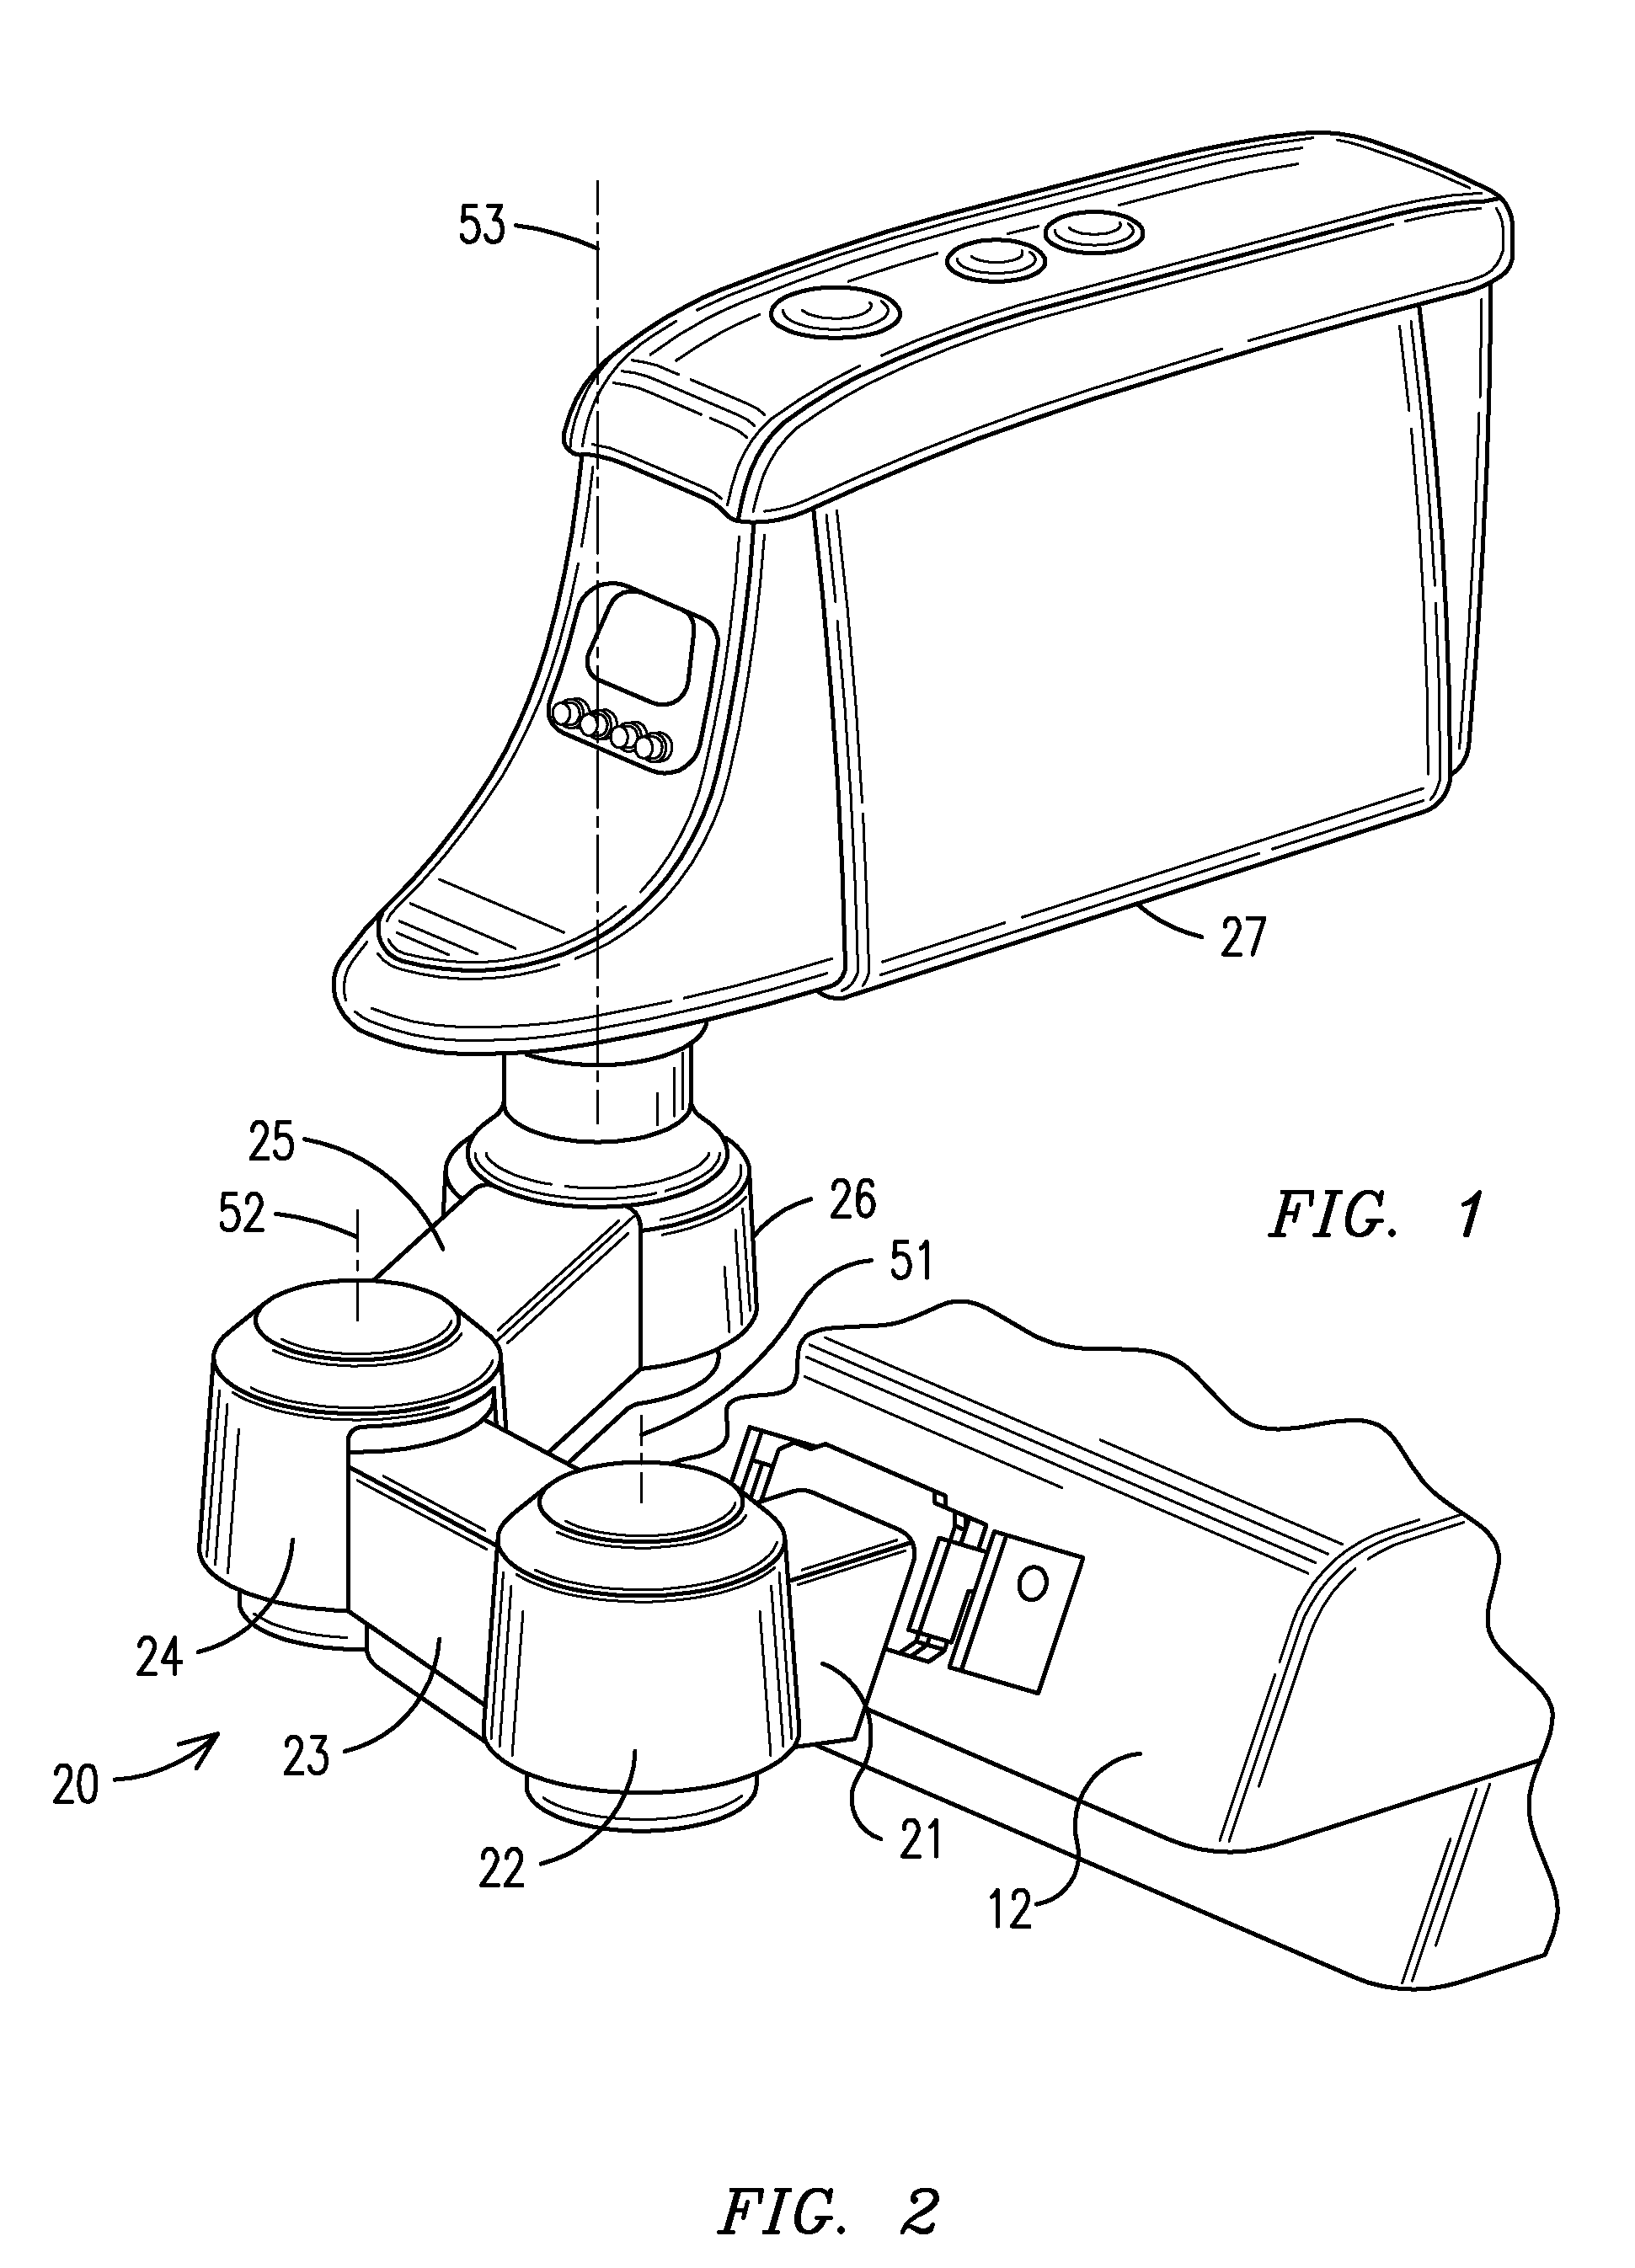 Dental Chair Having An Accessory Unit With An Adjustable Support Device